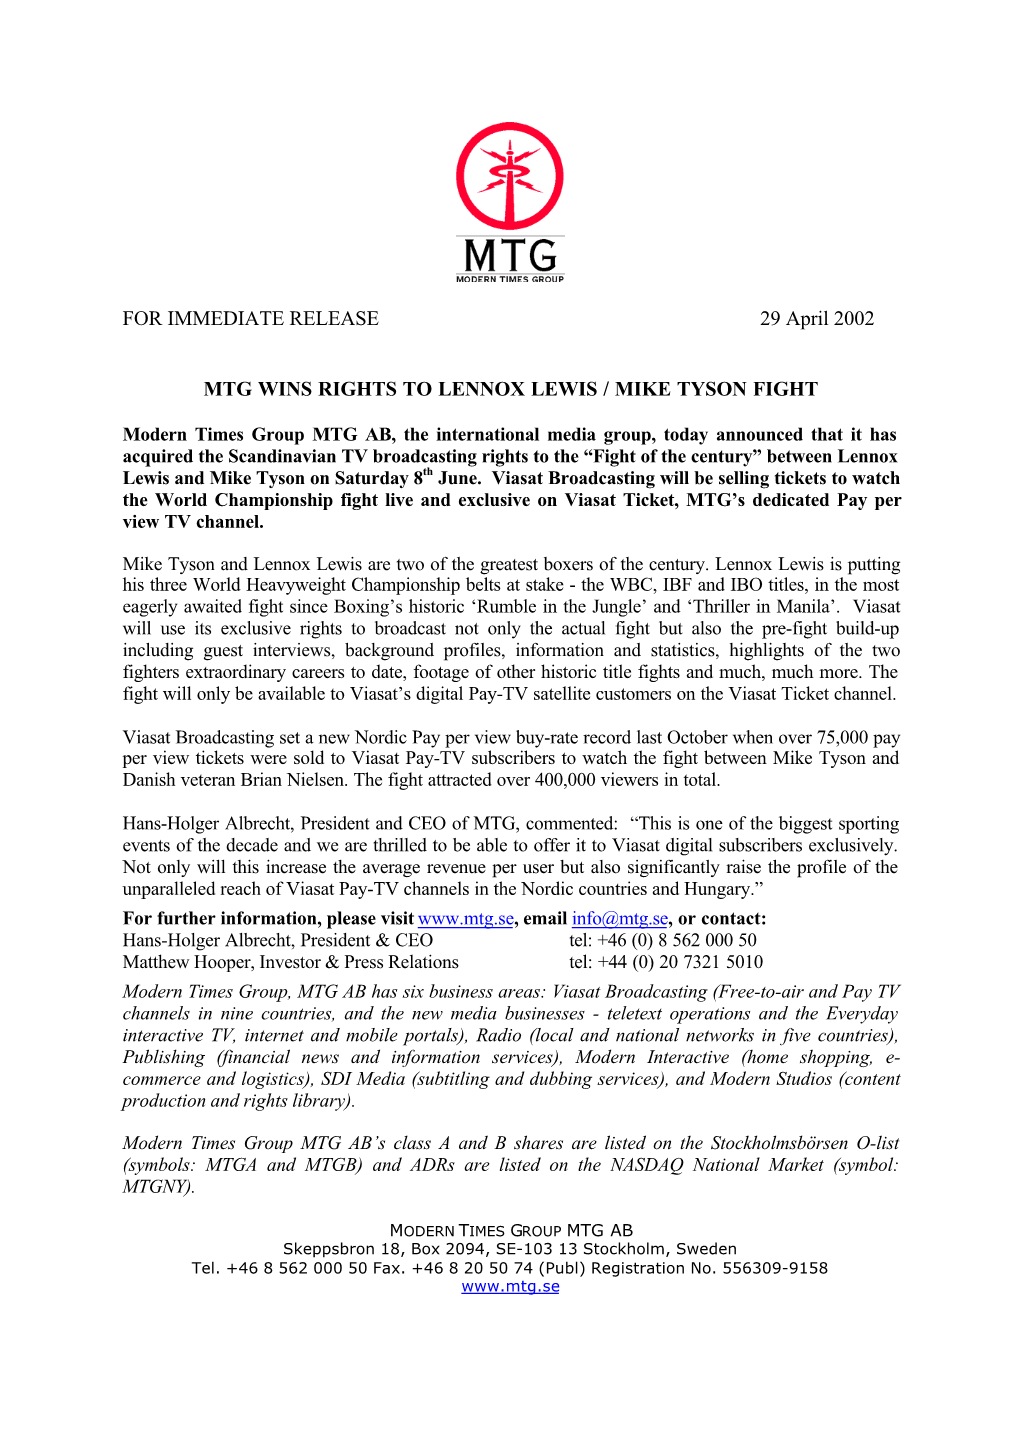 Mtg Wins Rights to Lennox Lewis / Mike Tyson Fight